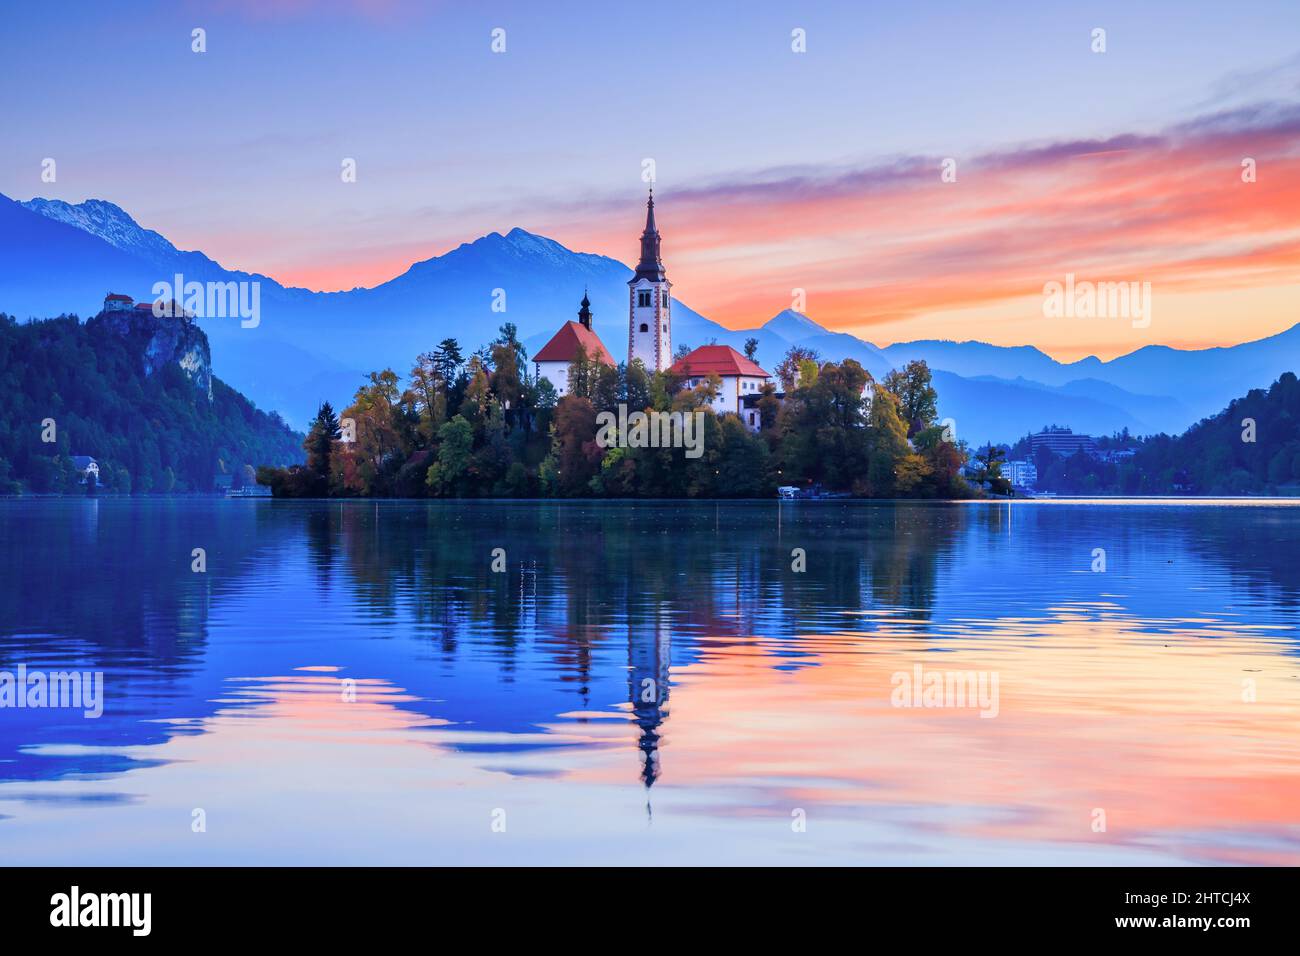 Lake Bled, Slovenia. Sunrise at Lake Bled with famous Bled Island and historic Bled Castle in the background. Stock Photo